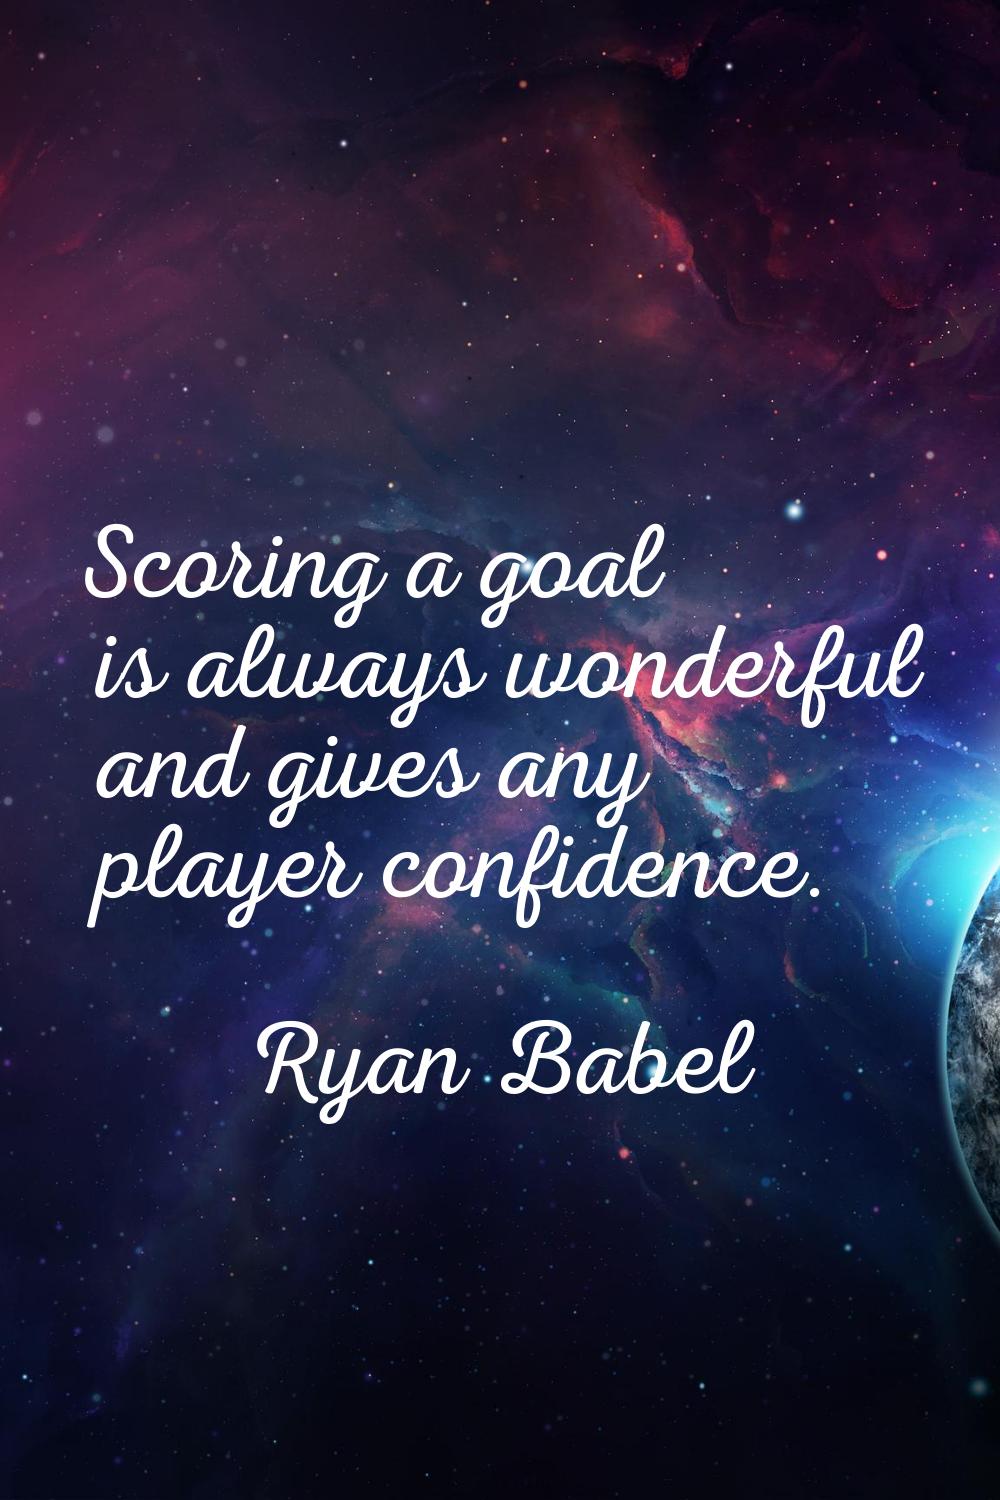 Scoring a goal is always wonderful and gives any player confidence.